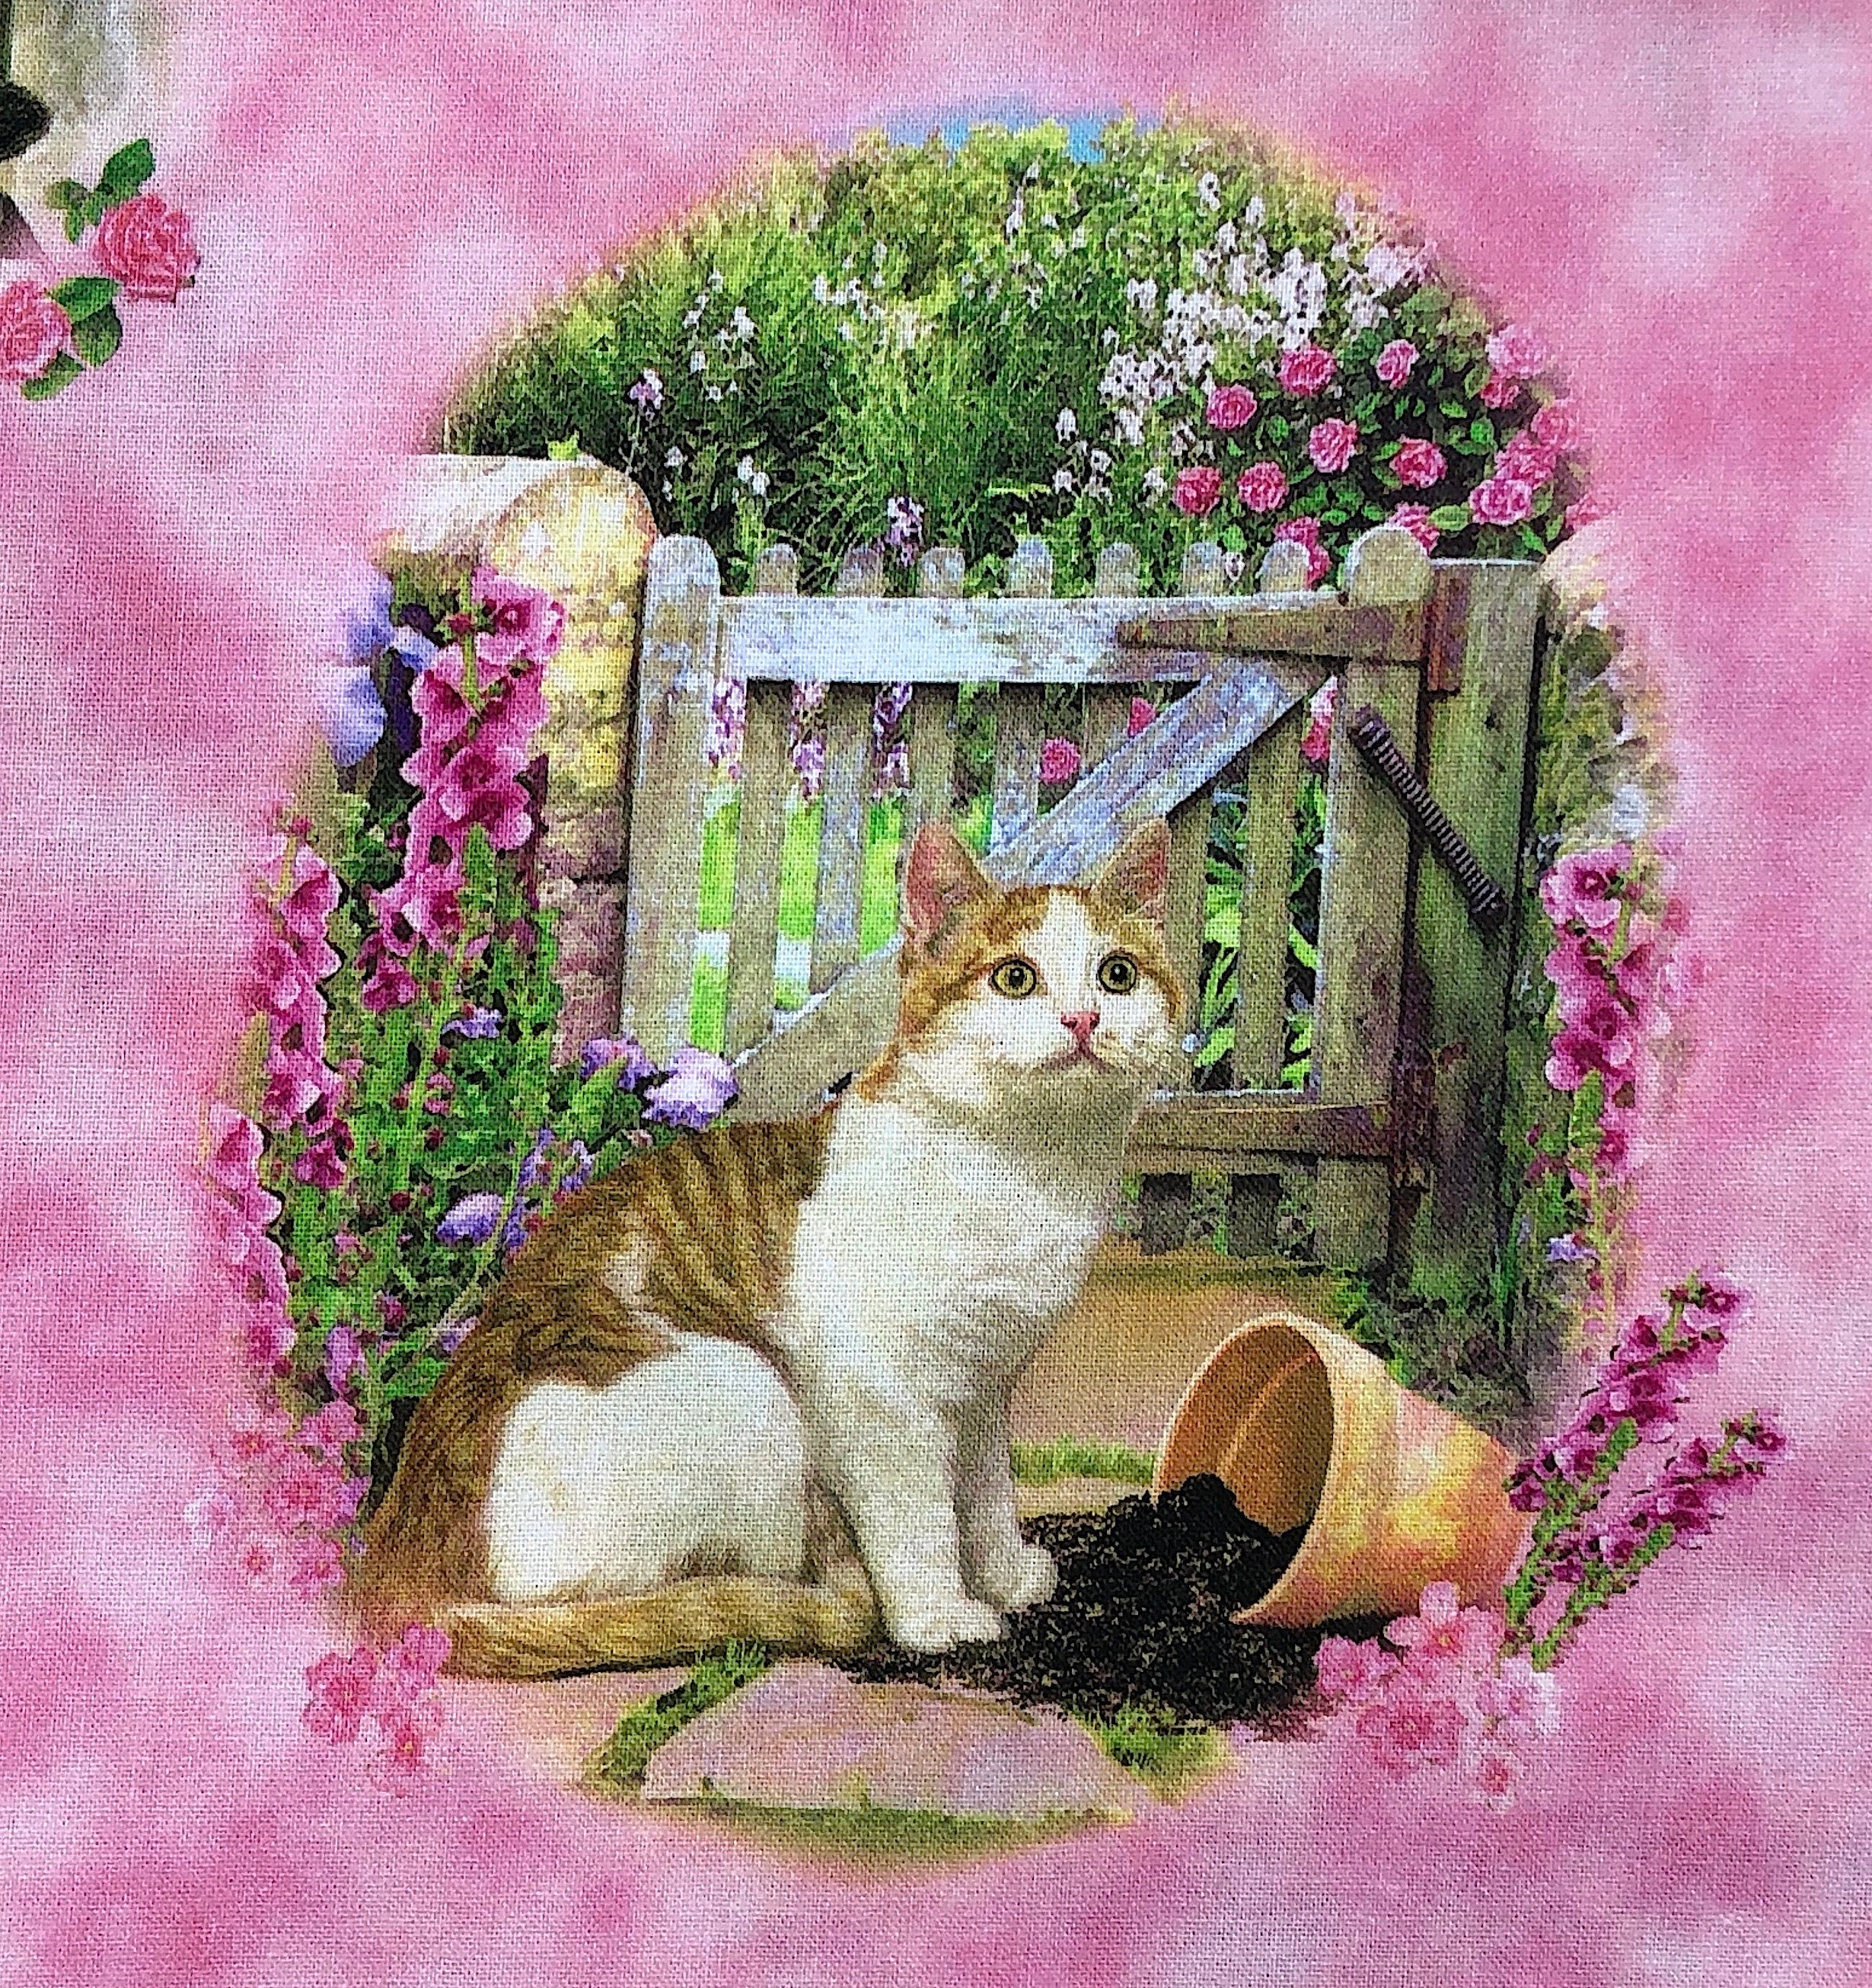 Cat sitting by a pot of dirt surrounded by flowers.